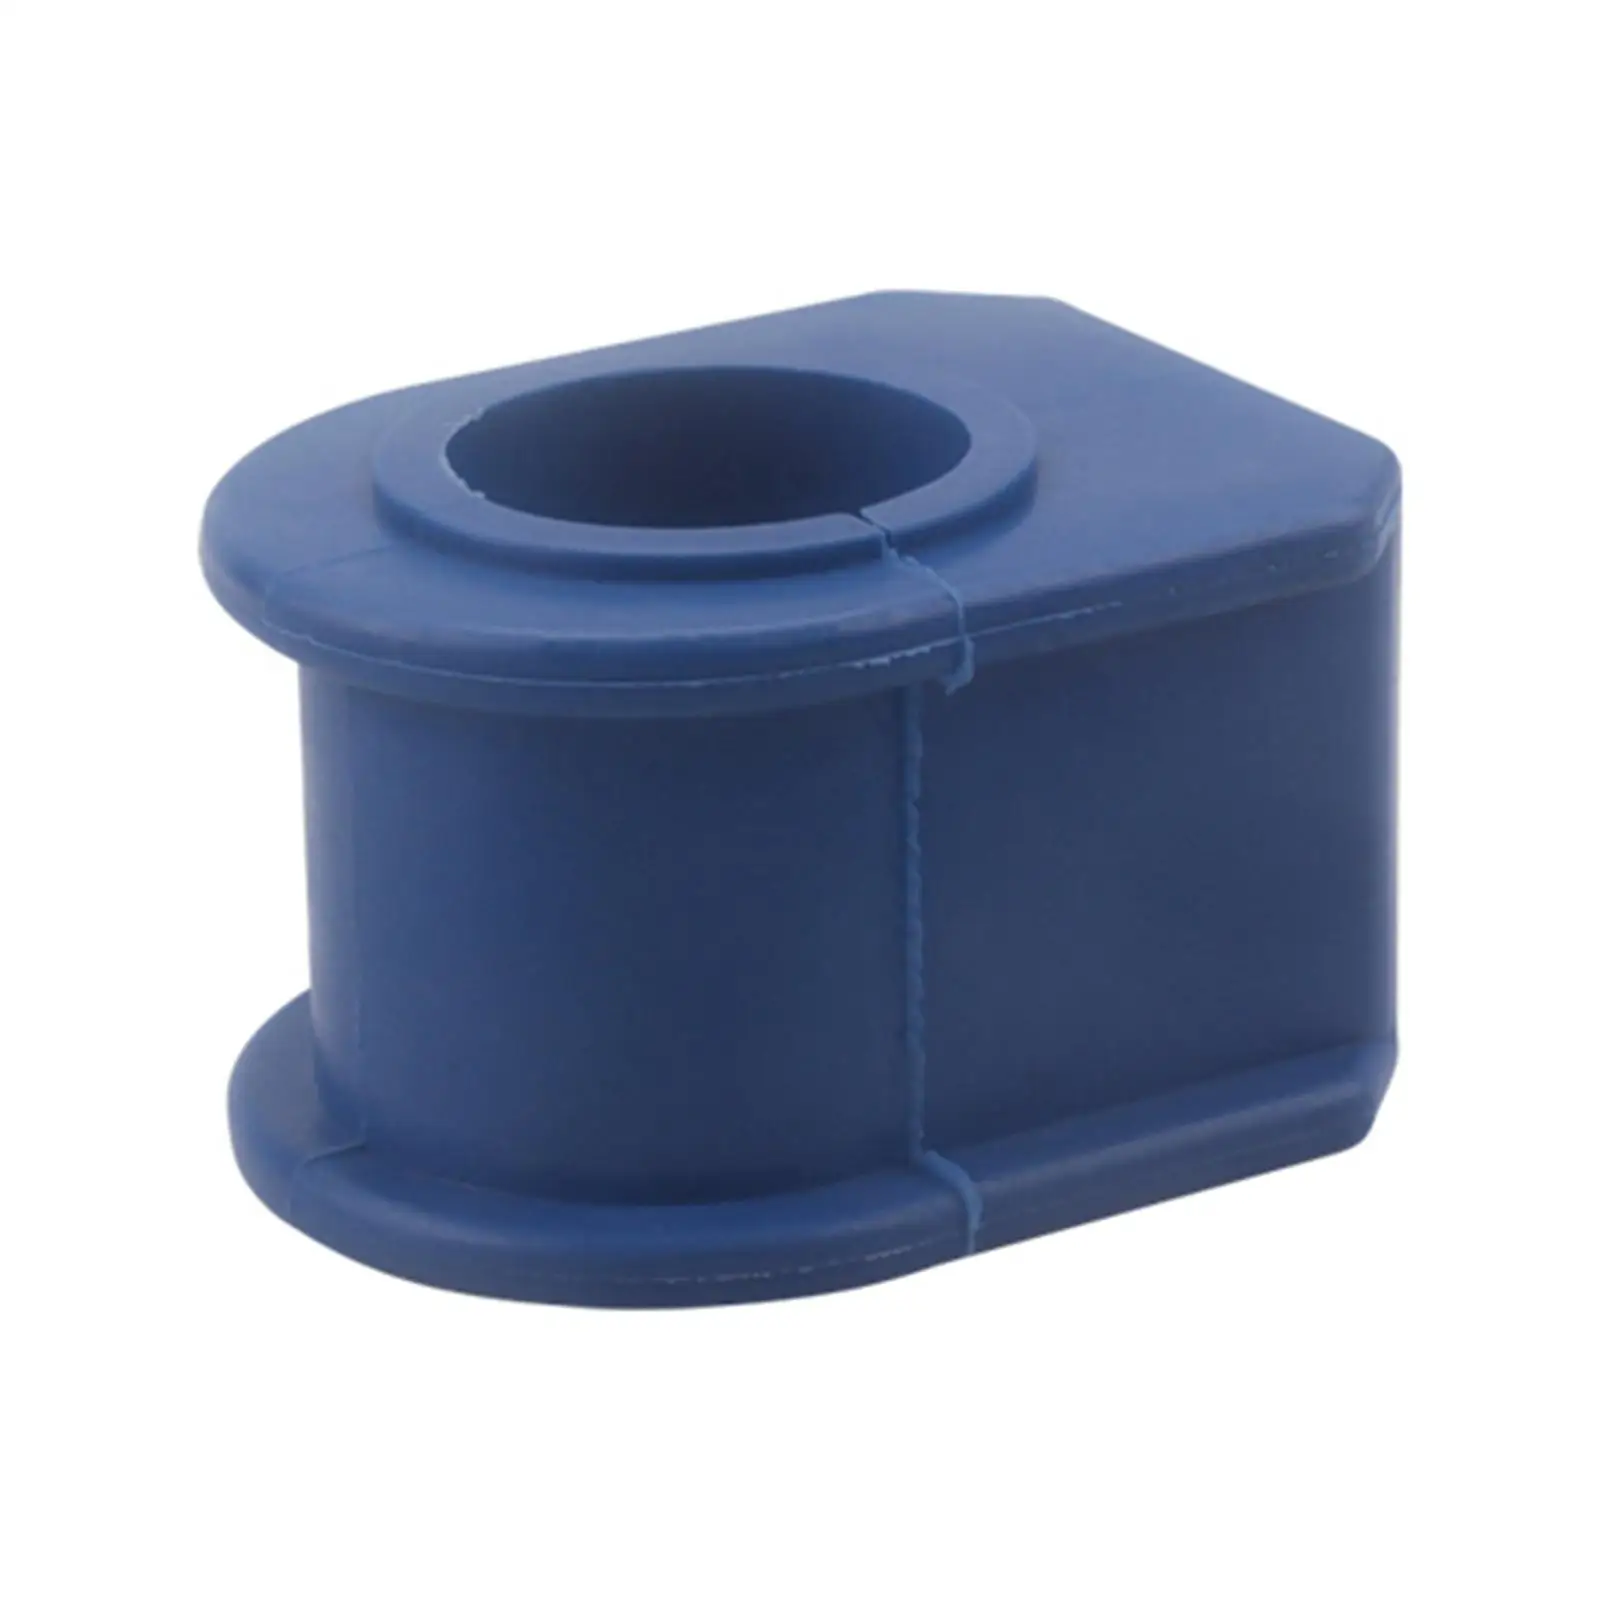 Set of  Bushing 999-2006 Made quality rubber material for durability  performance